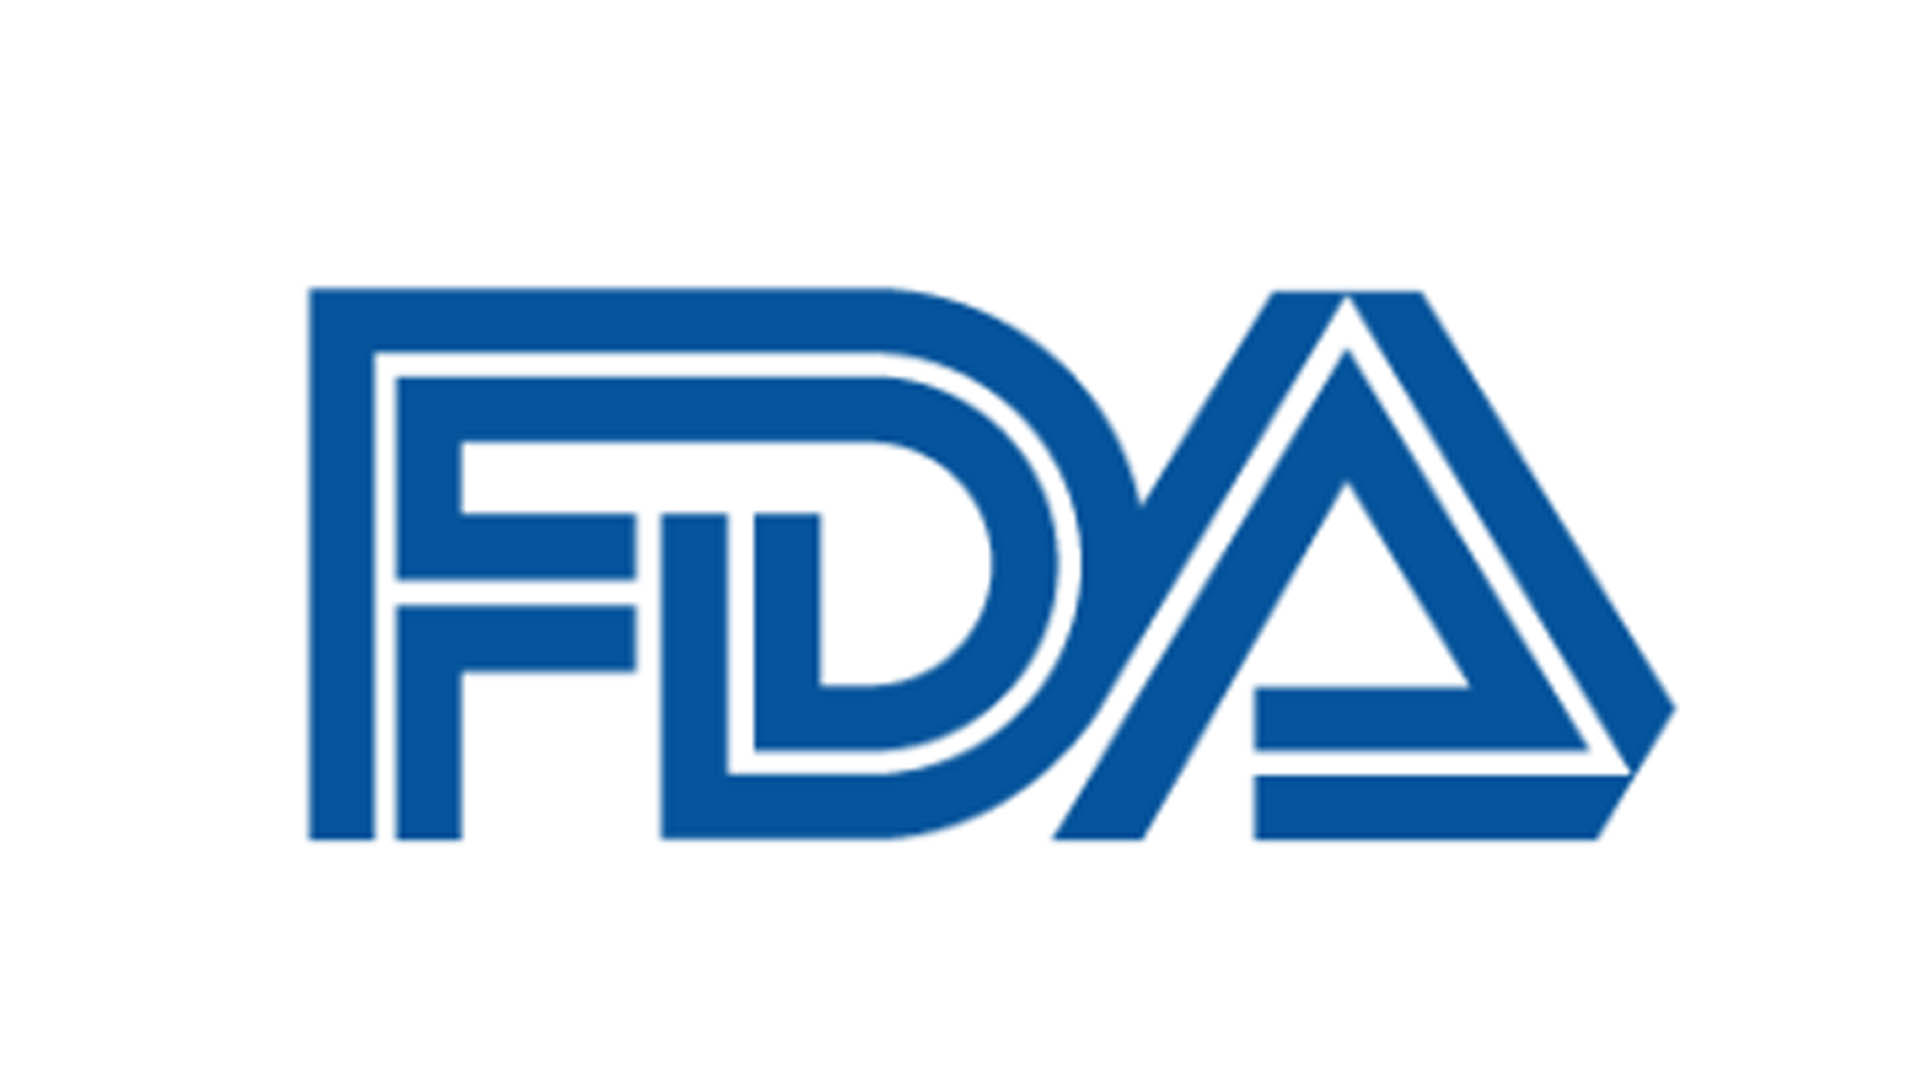 Health News Roundup: US FDA staff raises no new concerns about Abbott's heart device; Catalent sales edge past estimates as focus shifts to Novo deal and more